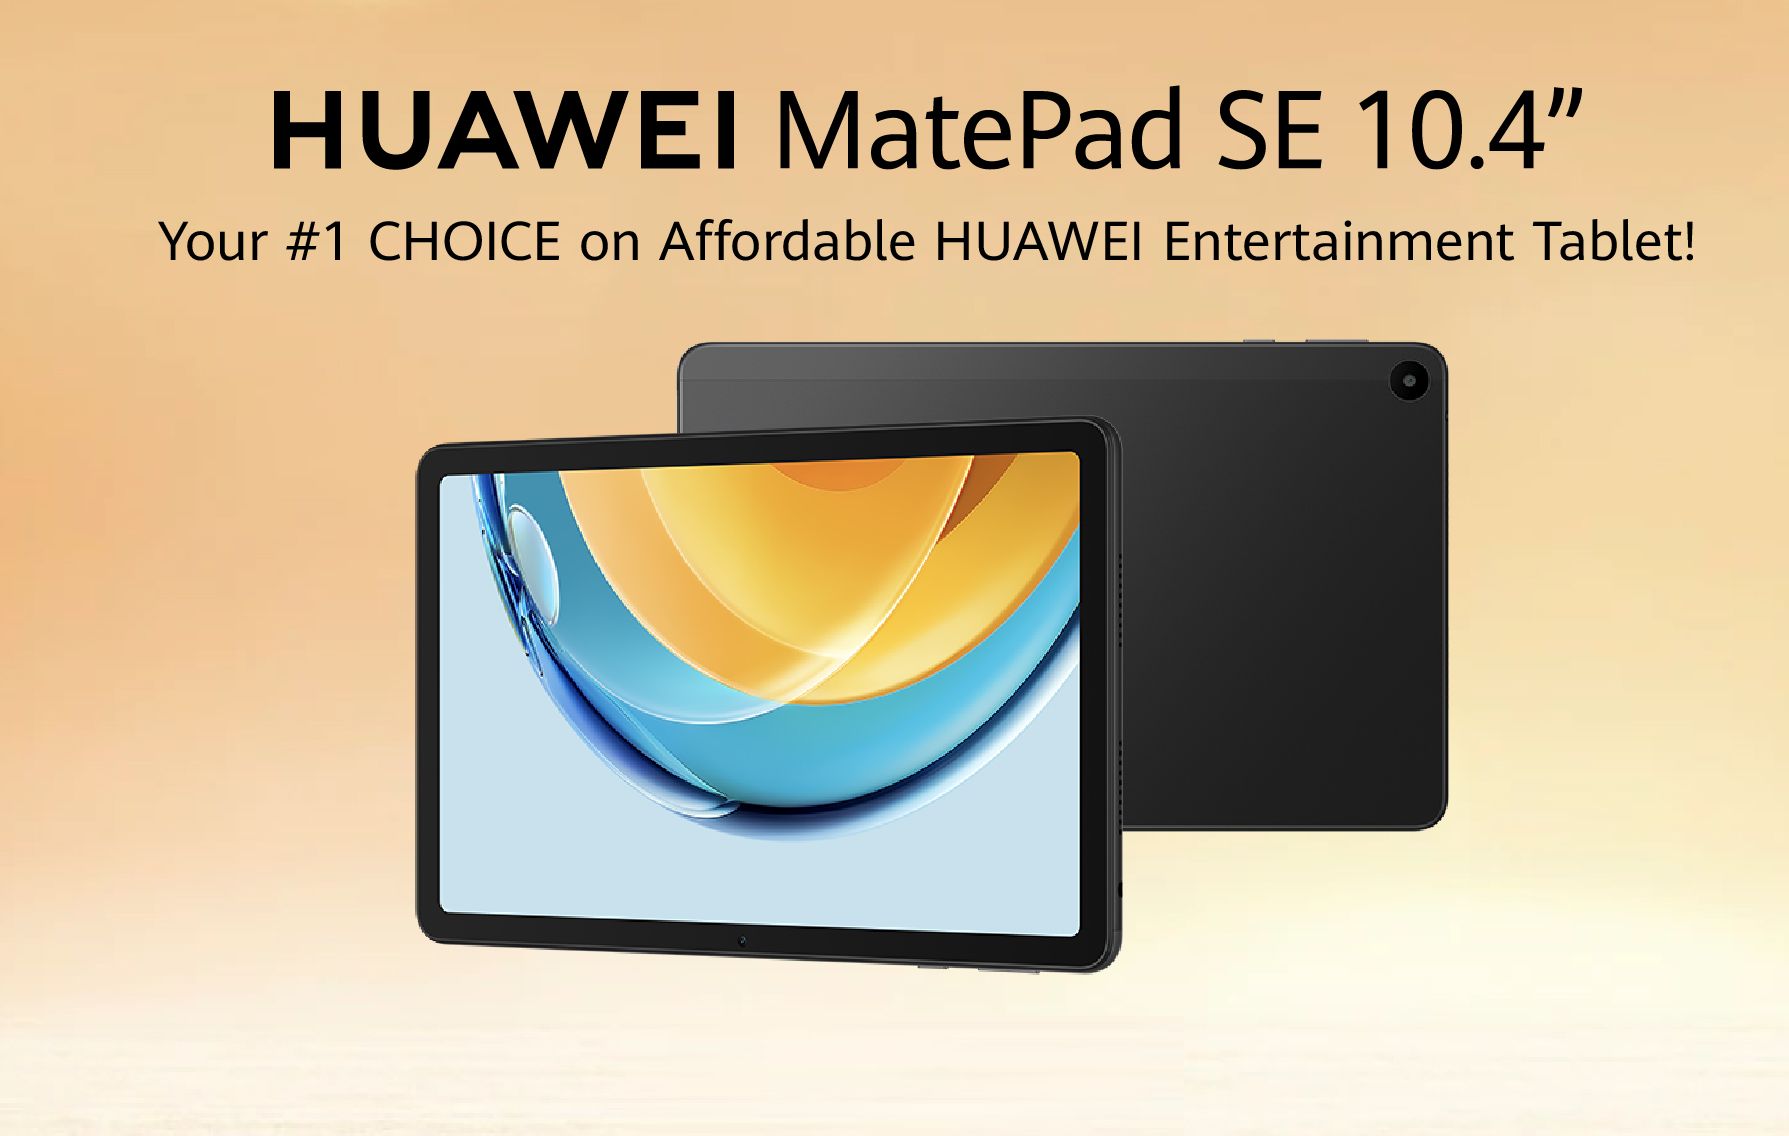 Huawei MatePad SE 10.4 SoyaCincau a time RM300 in rebate Malaysia - gets tablet instant for limited